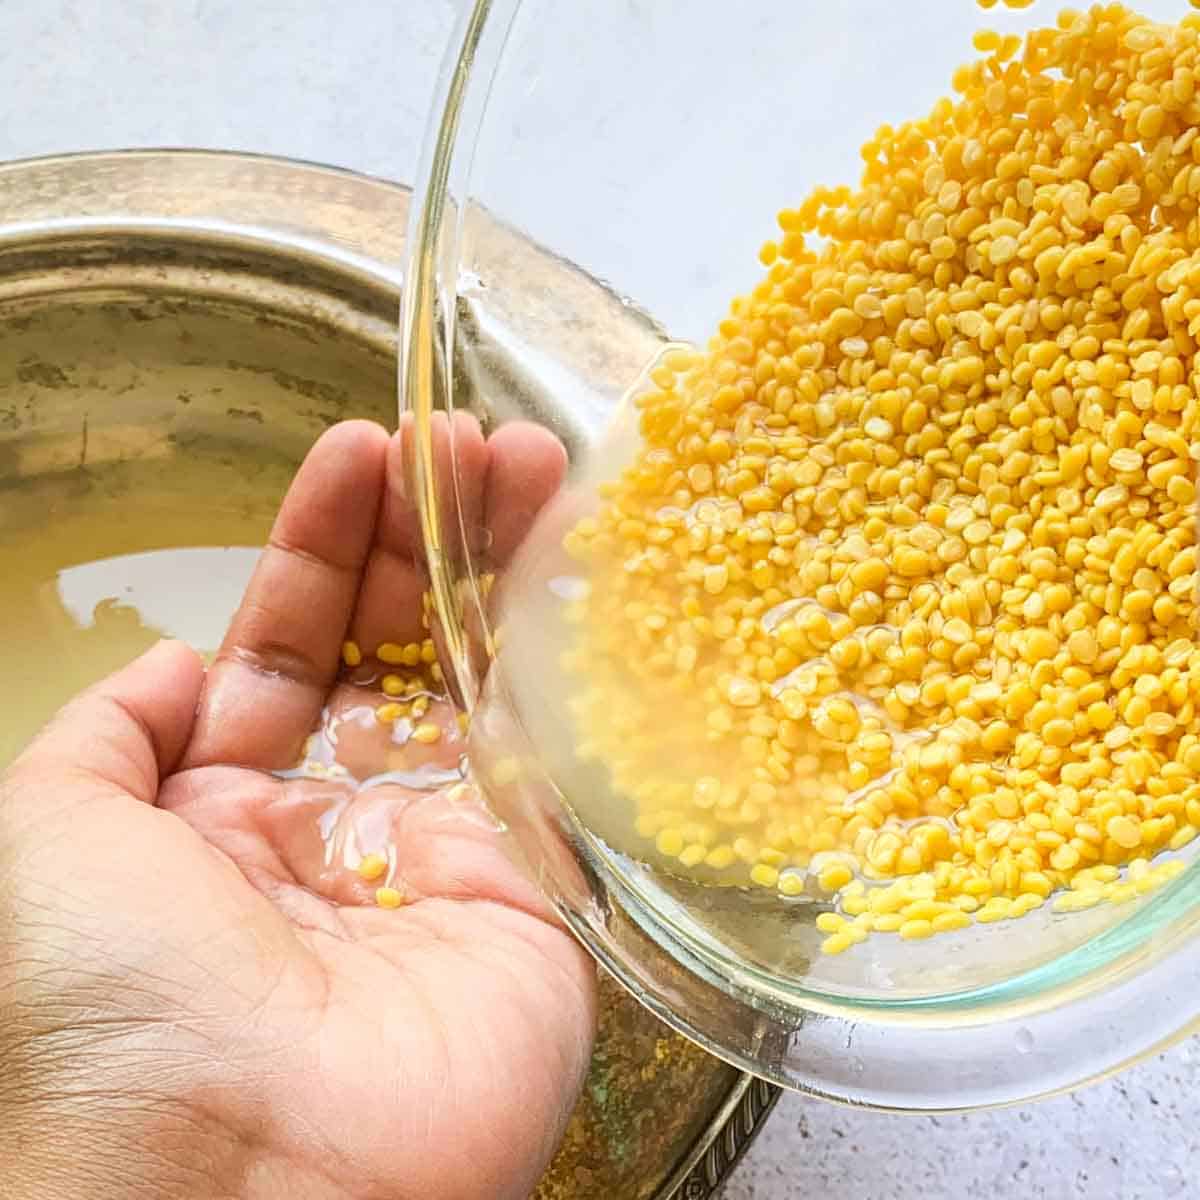 Moong dal being rinsed and drained to remove starchy and cloudy residue